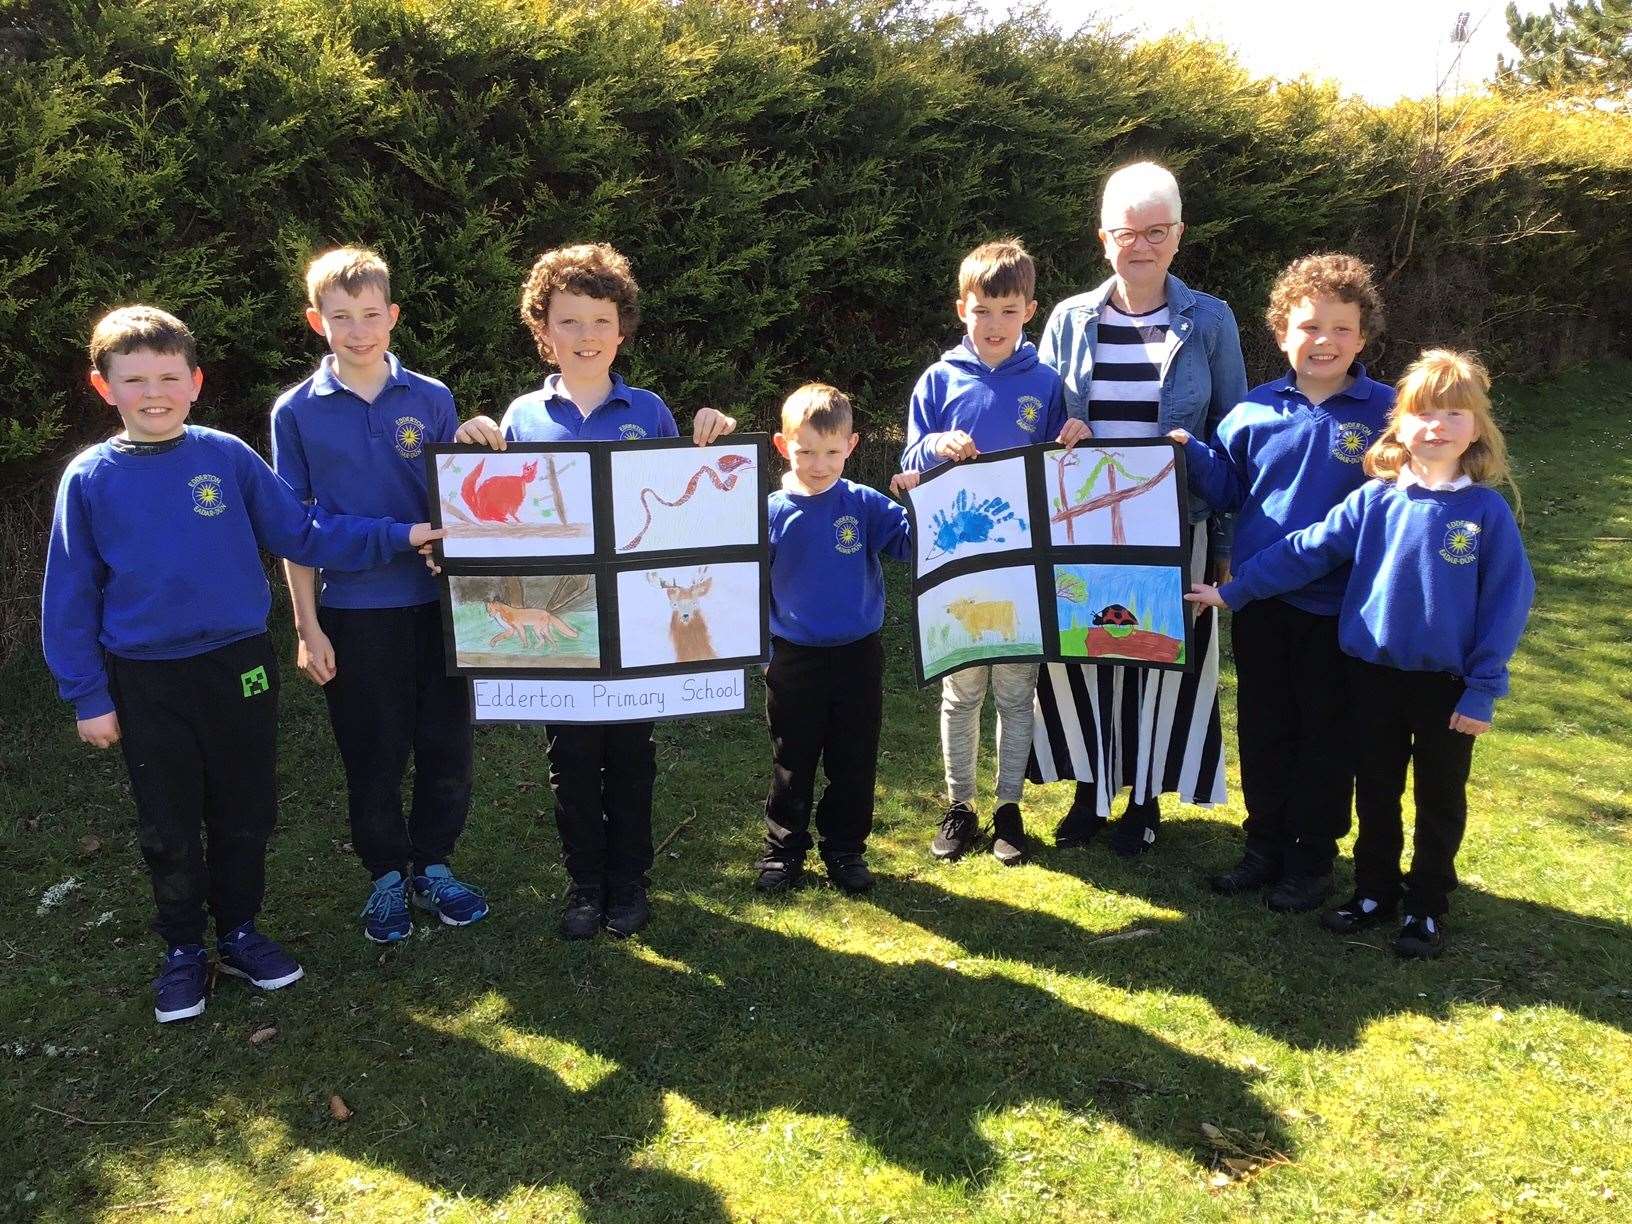 Pupils at Edderton Primary School came up with some amazing creations which were collected by Deputy Lieutenant Christine Mackay, Ardgay.